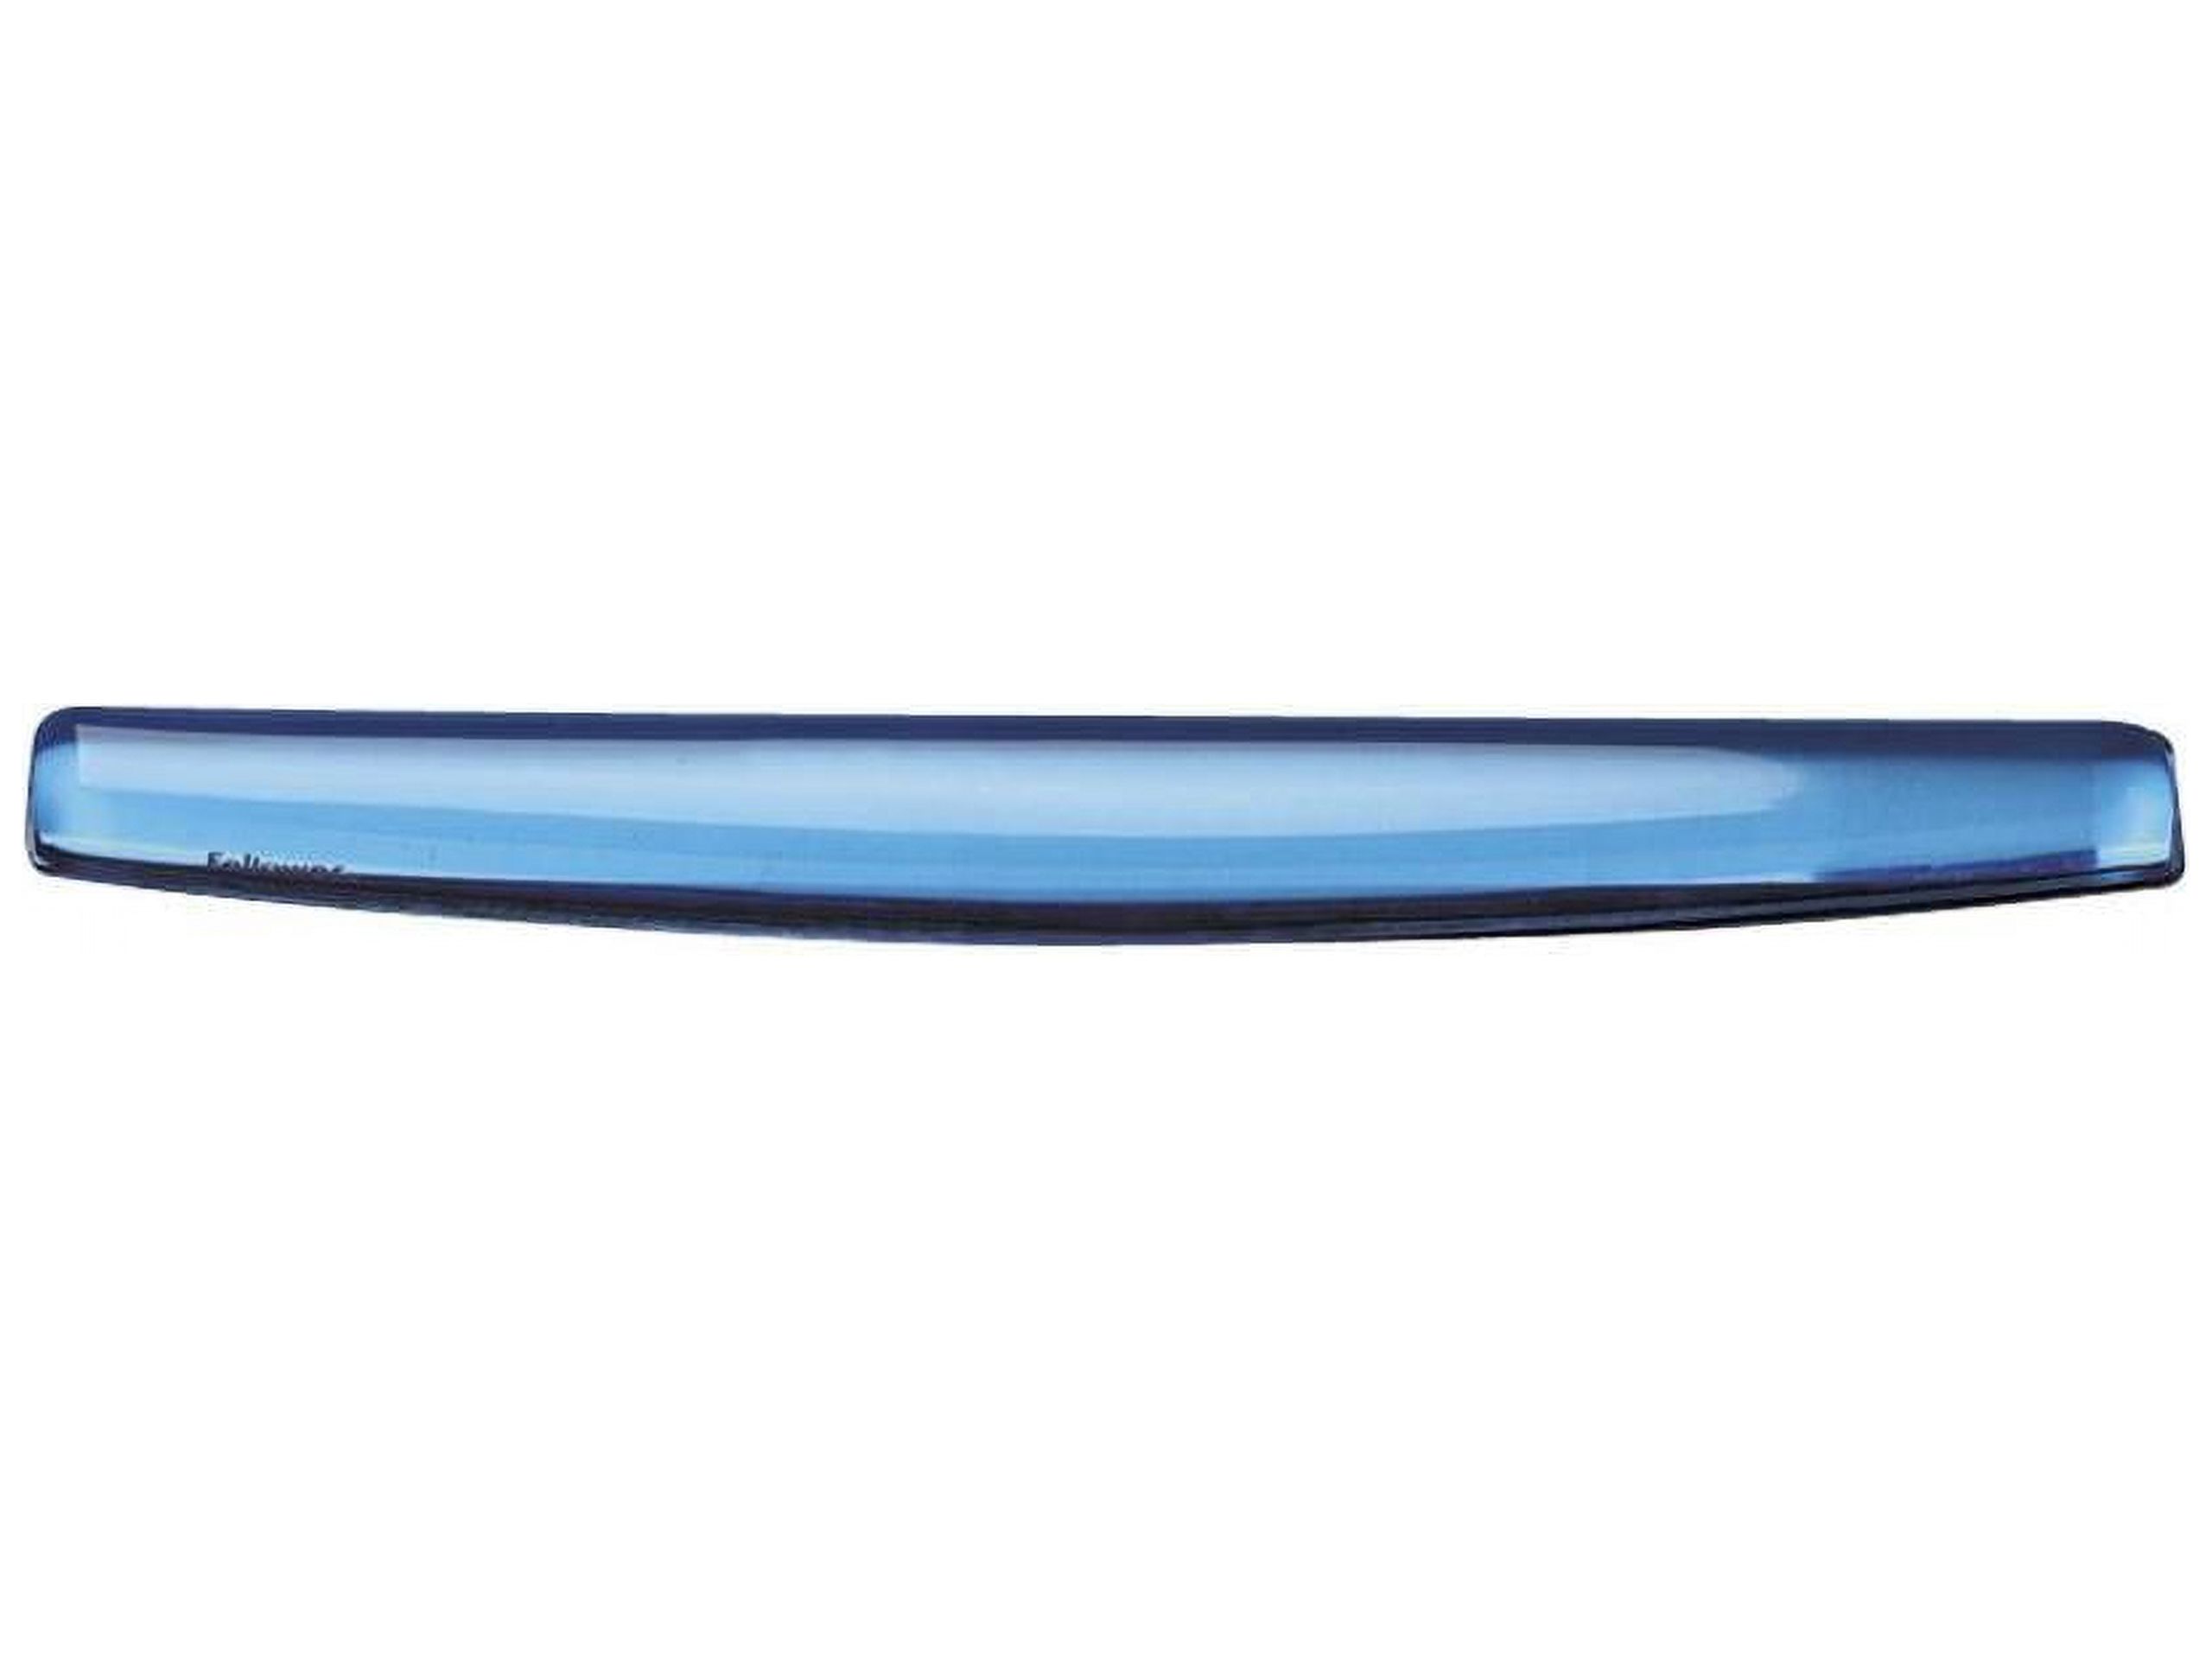 Fellowes 91137 Gel Wrist Rest - Crystals, Blue - image 1 of 4